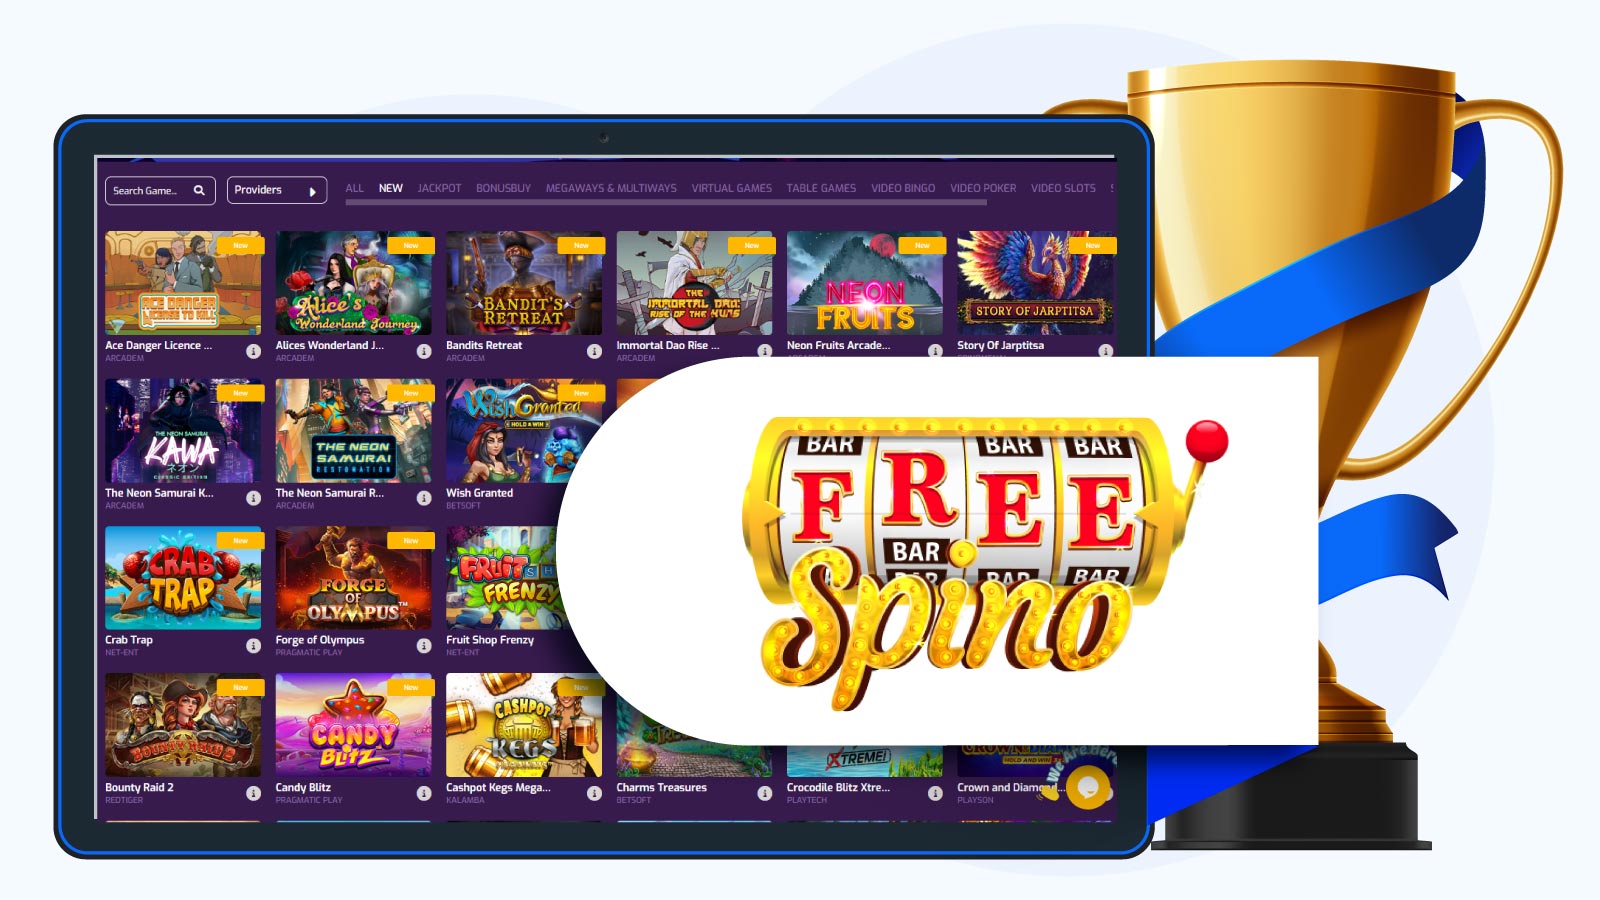 FreeSpino Casino – Our Pick of The Best Online Casino for 2023